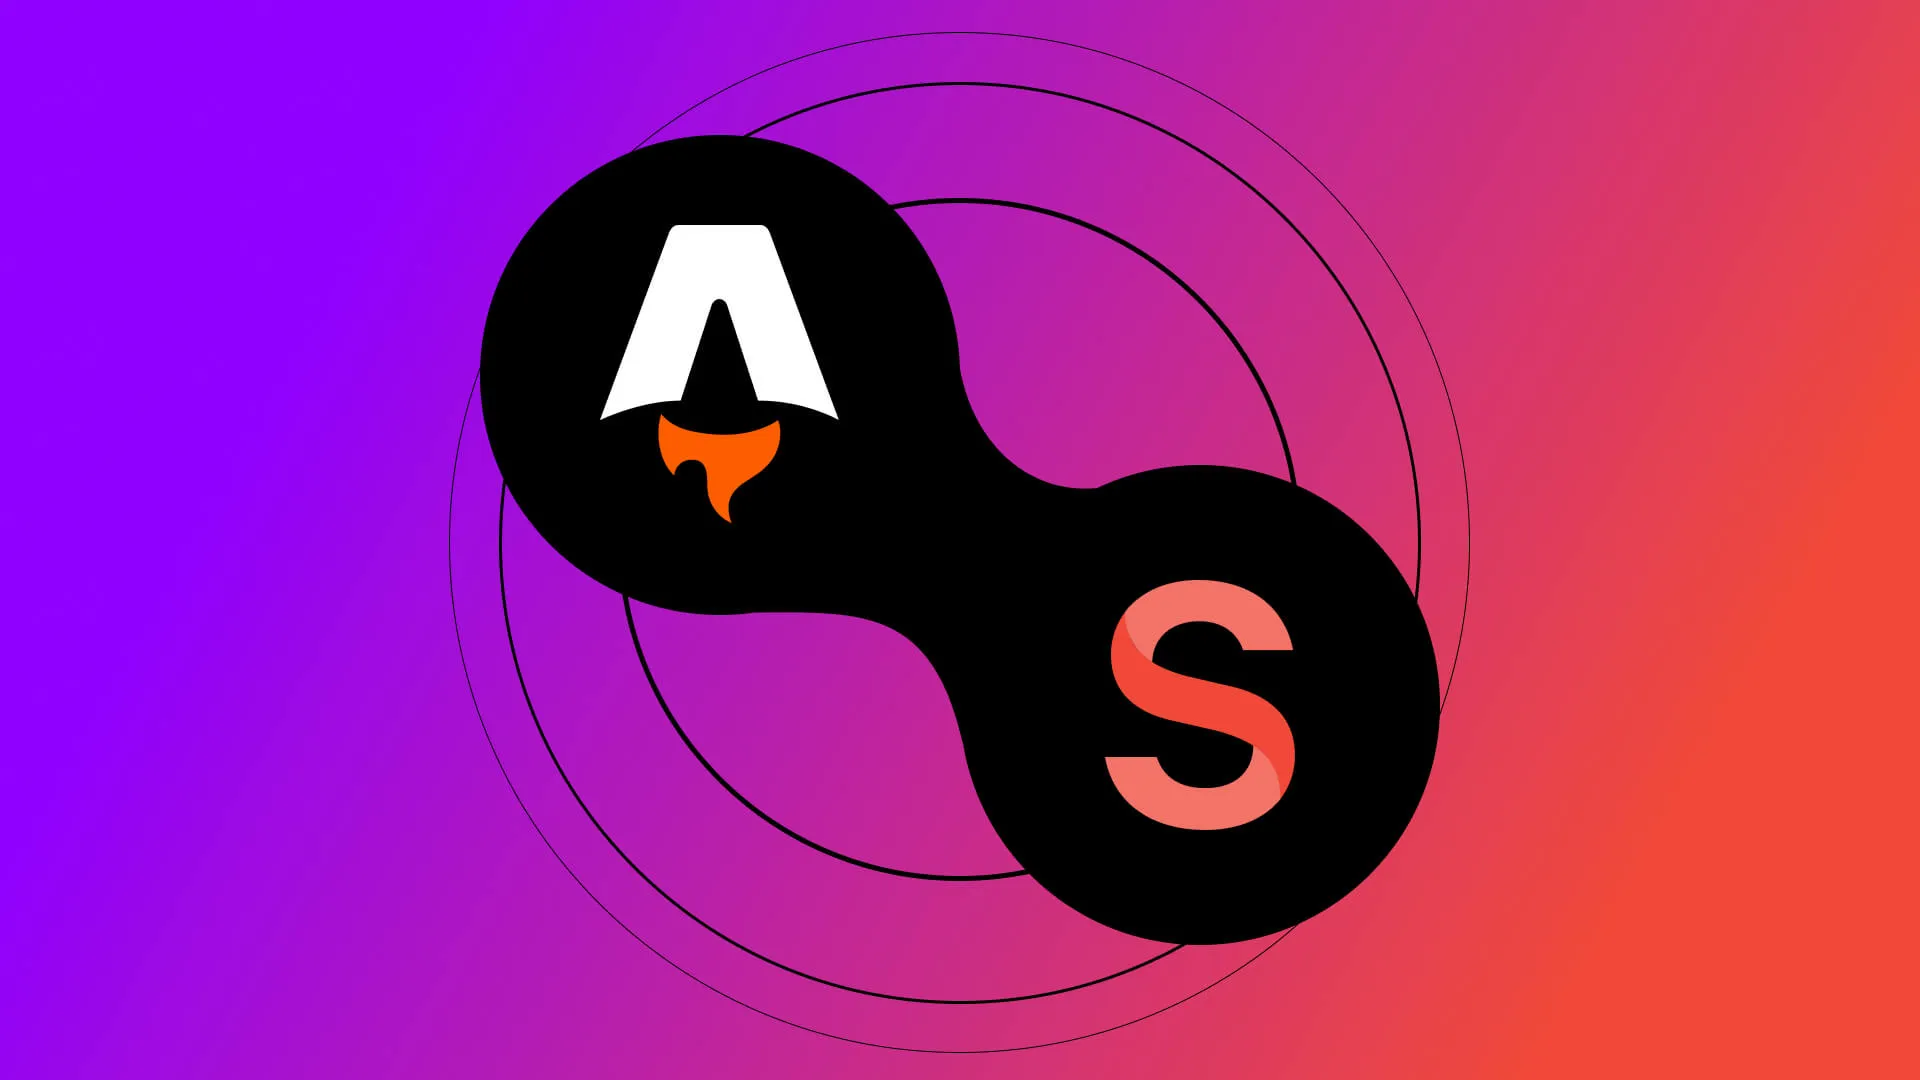 A banner with Astro and Sanity's logos